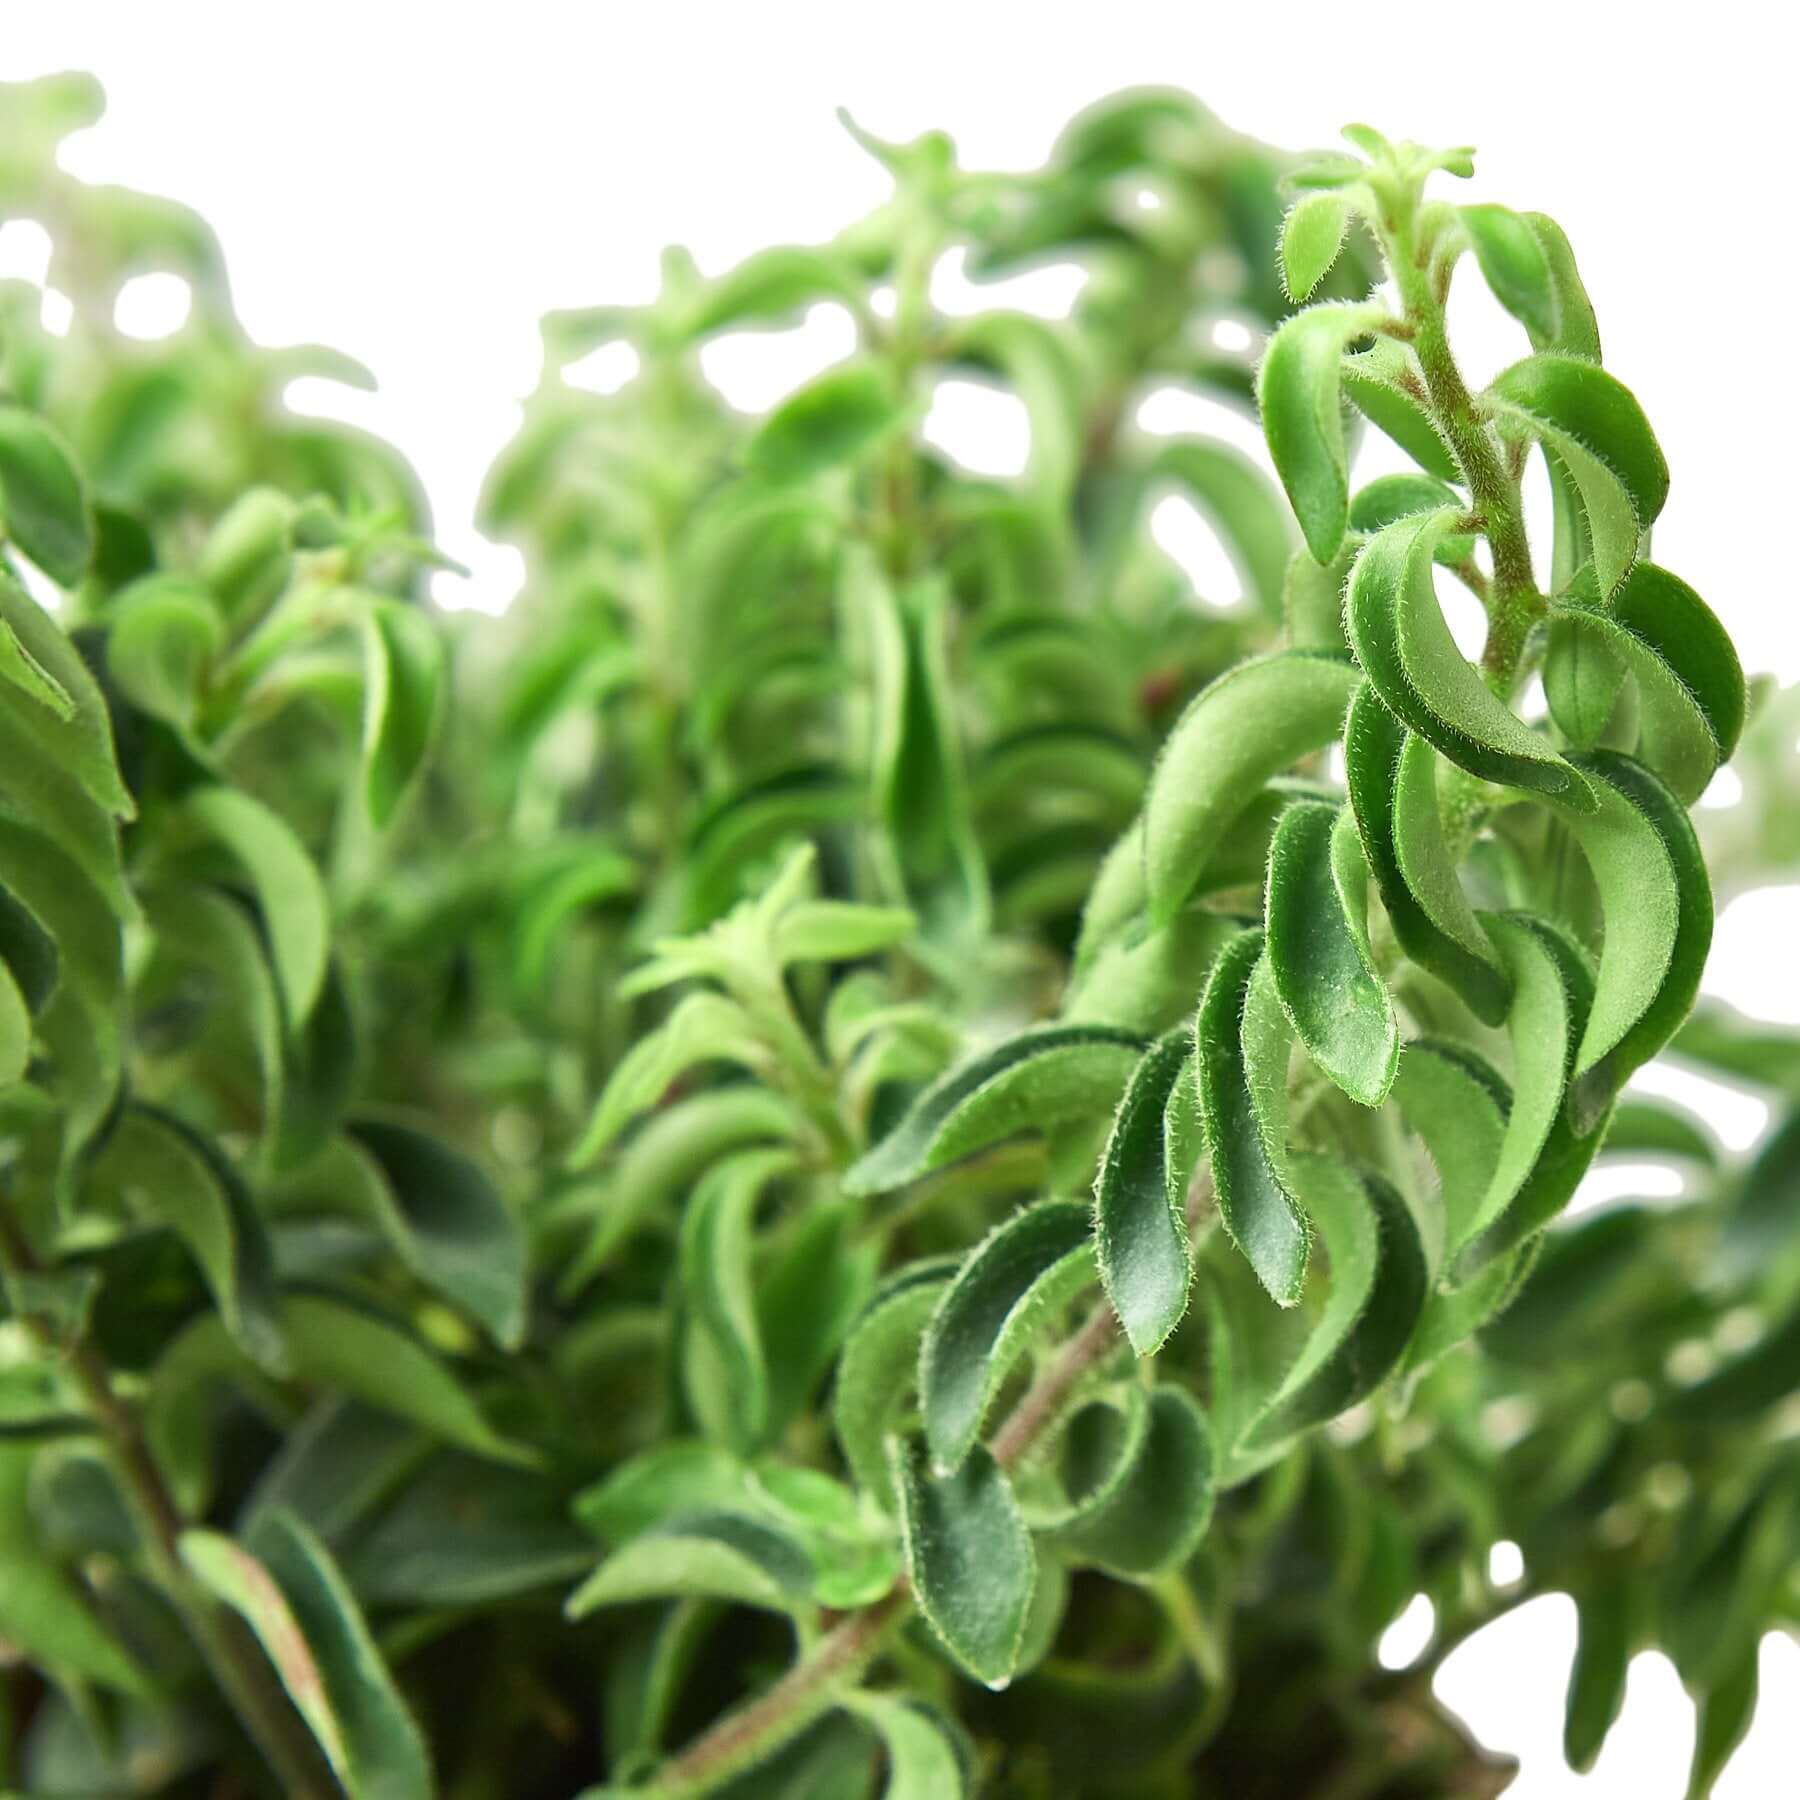 Curly Lipstick Plant | Modern house plants that clean the air